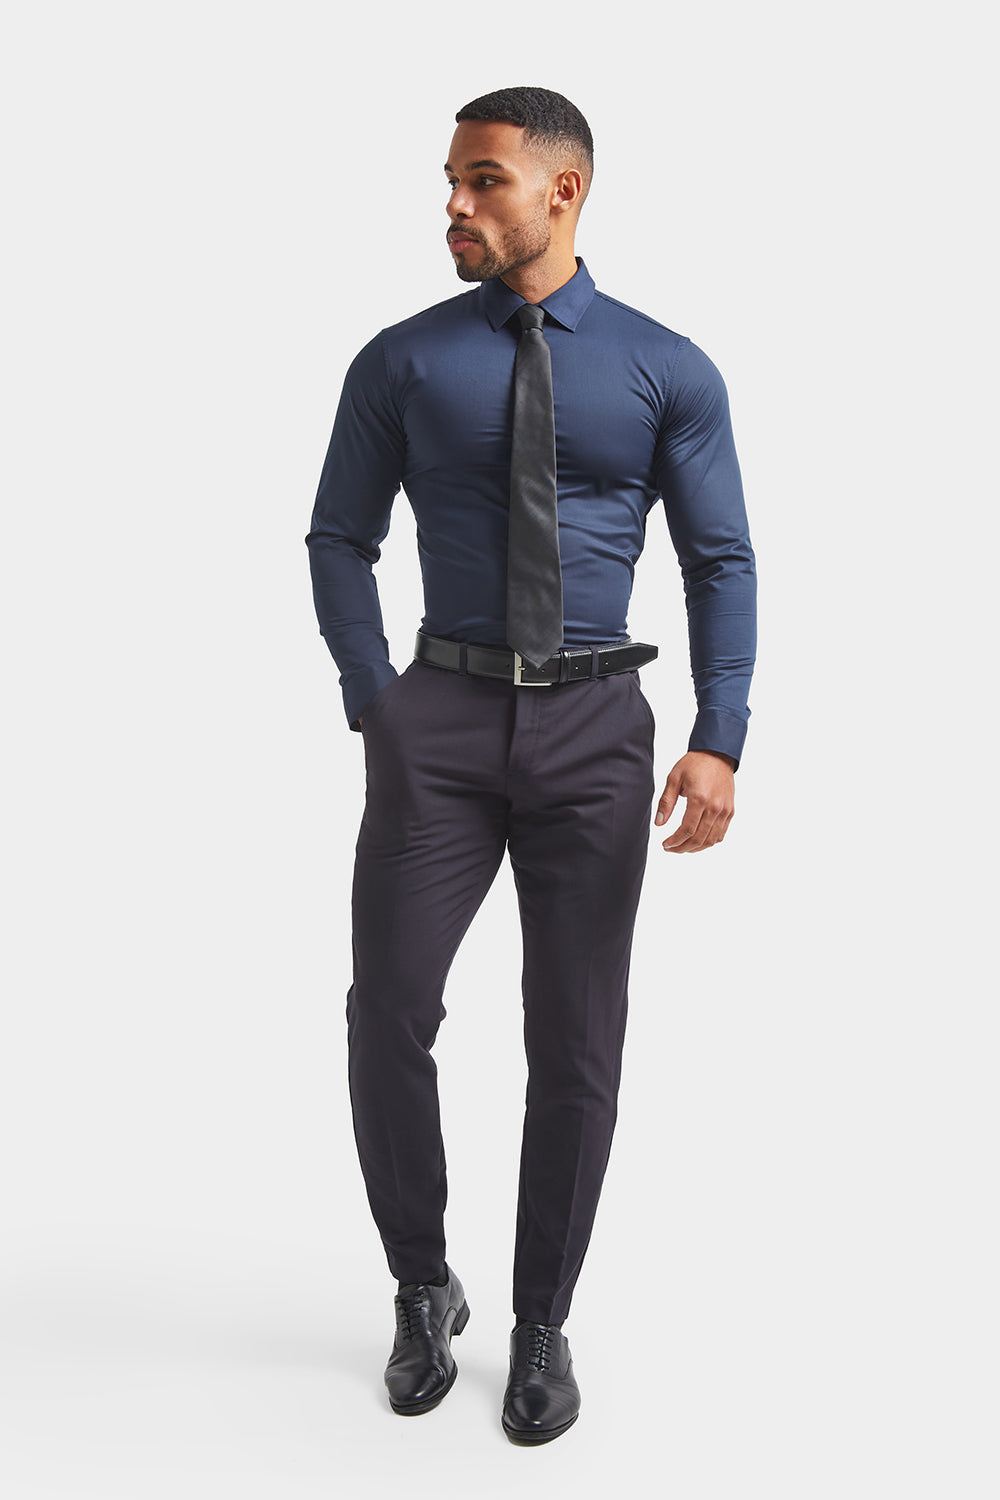 What Color Pants Go With A Navy Blue Shirt? | Navy blue shirts, Navy blue  shirt outfit, Blue shirt outfits